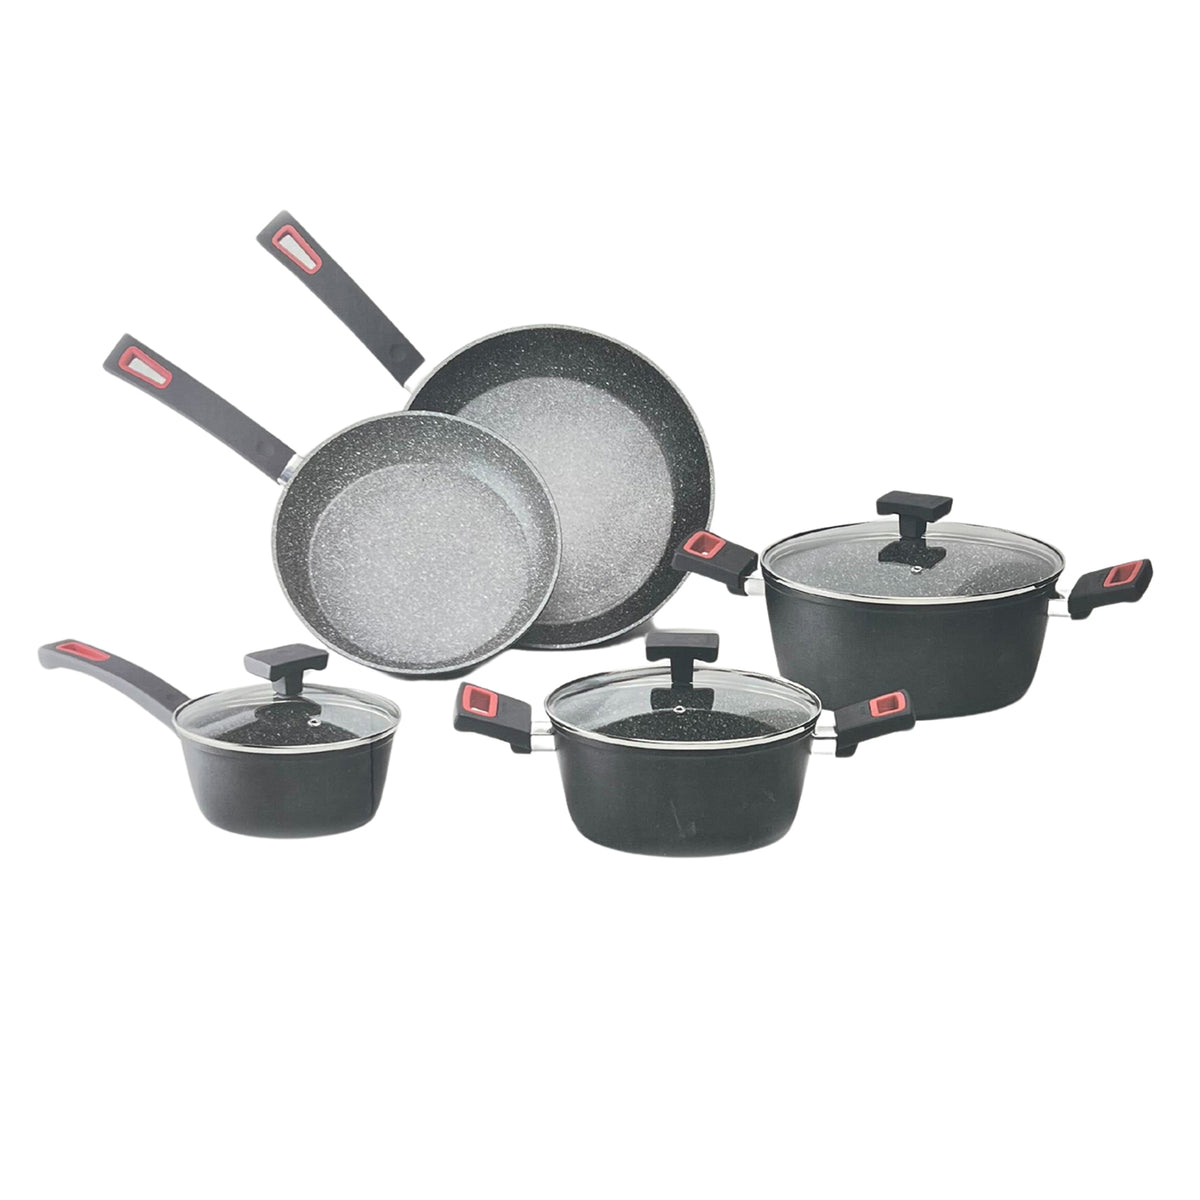 Cookware Set of 8 - Black ColorContains 8 Pieces